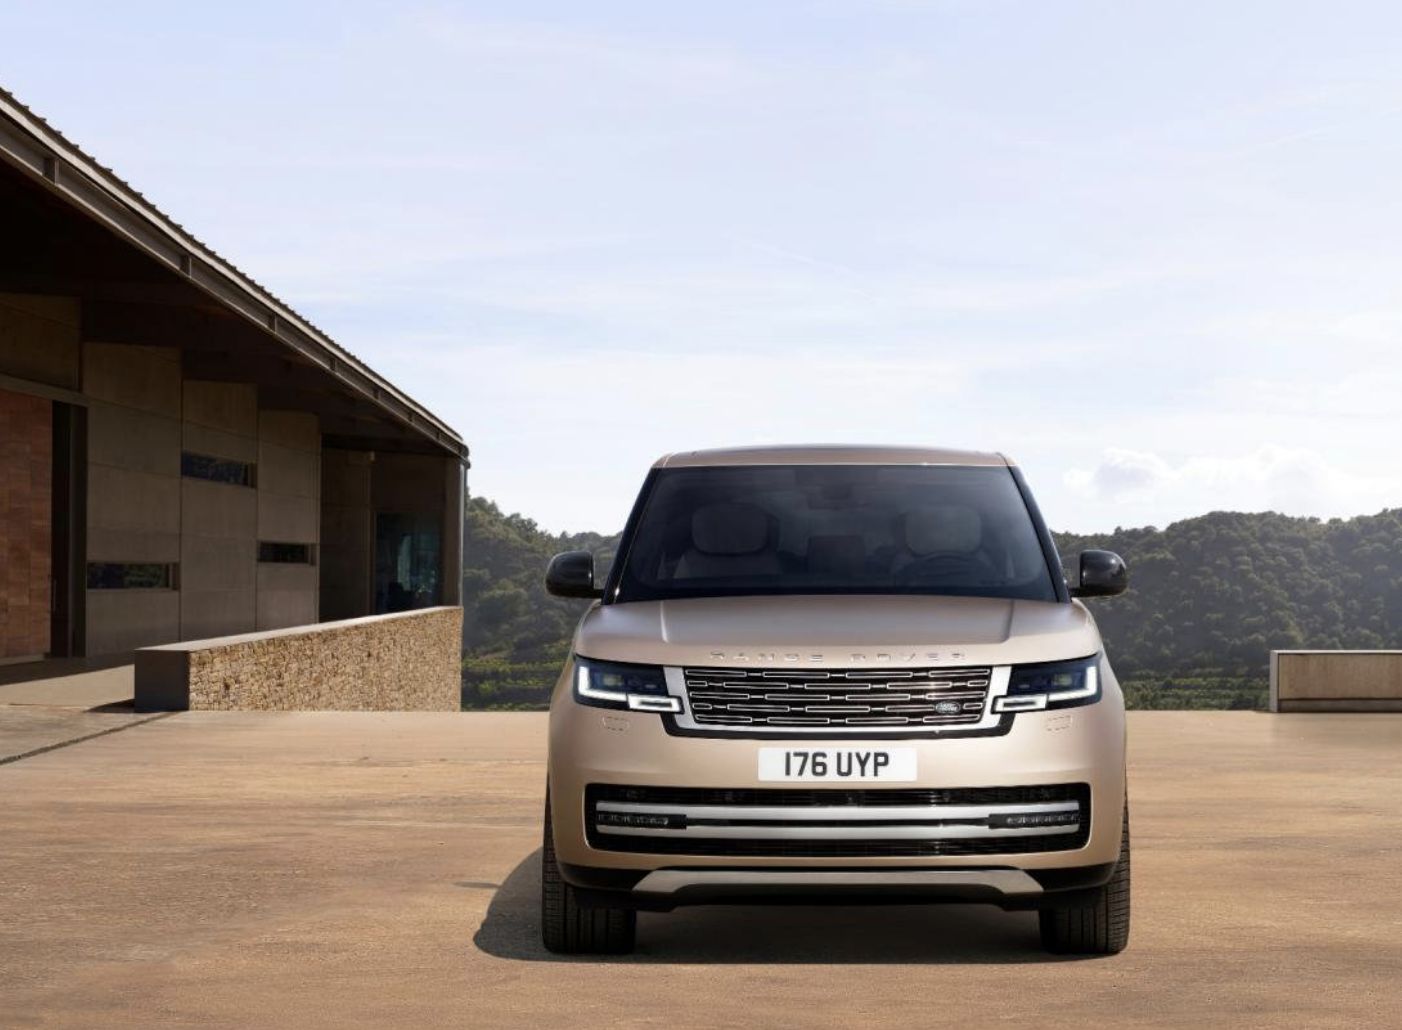 Leading the industry legend, the new generation of Range Rover as a model